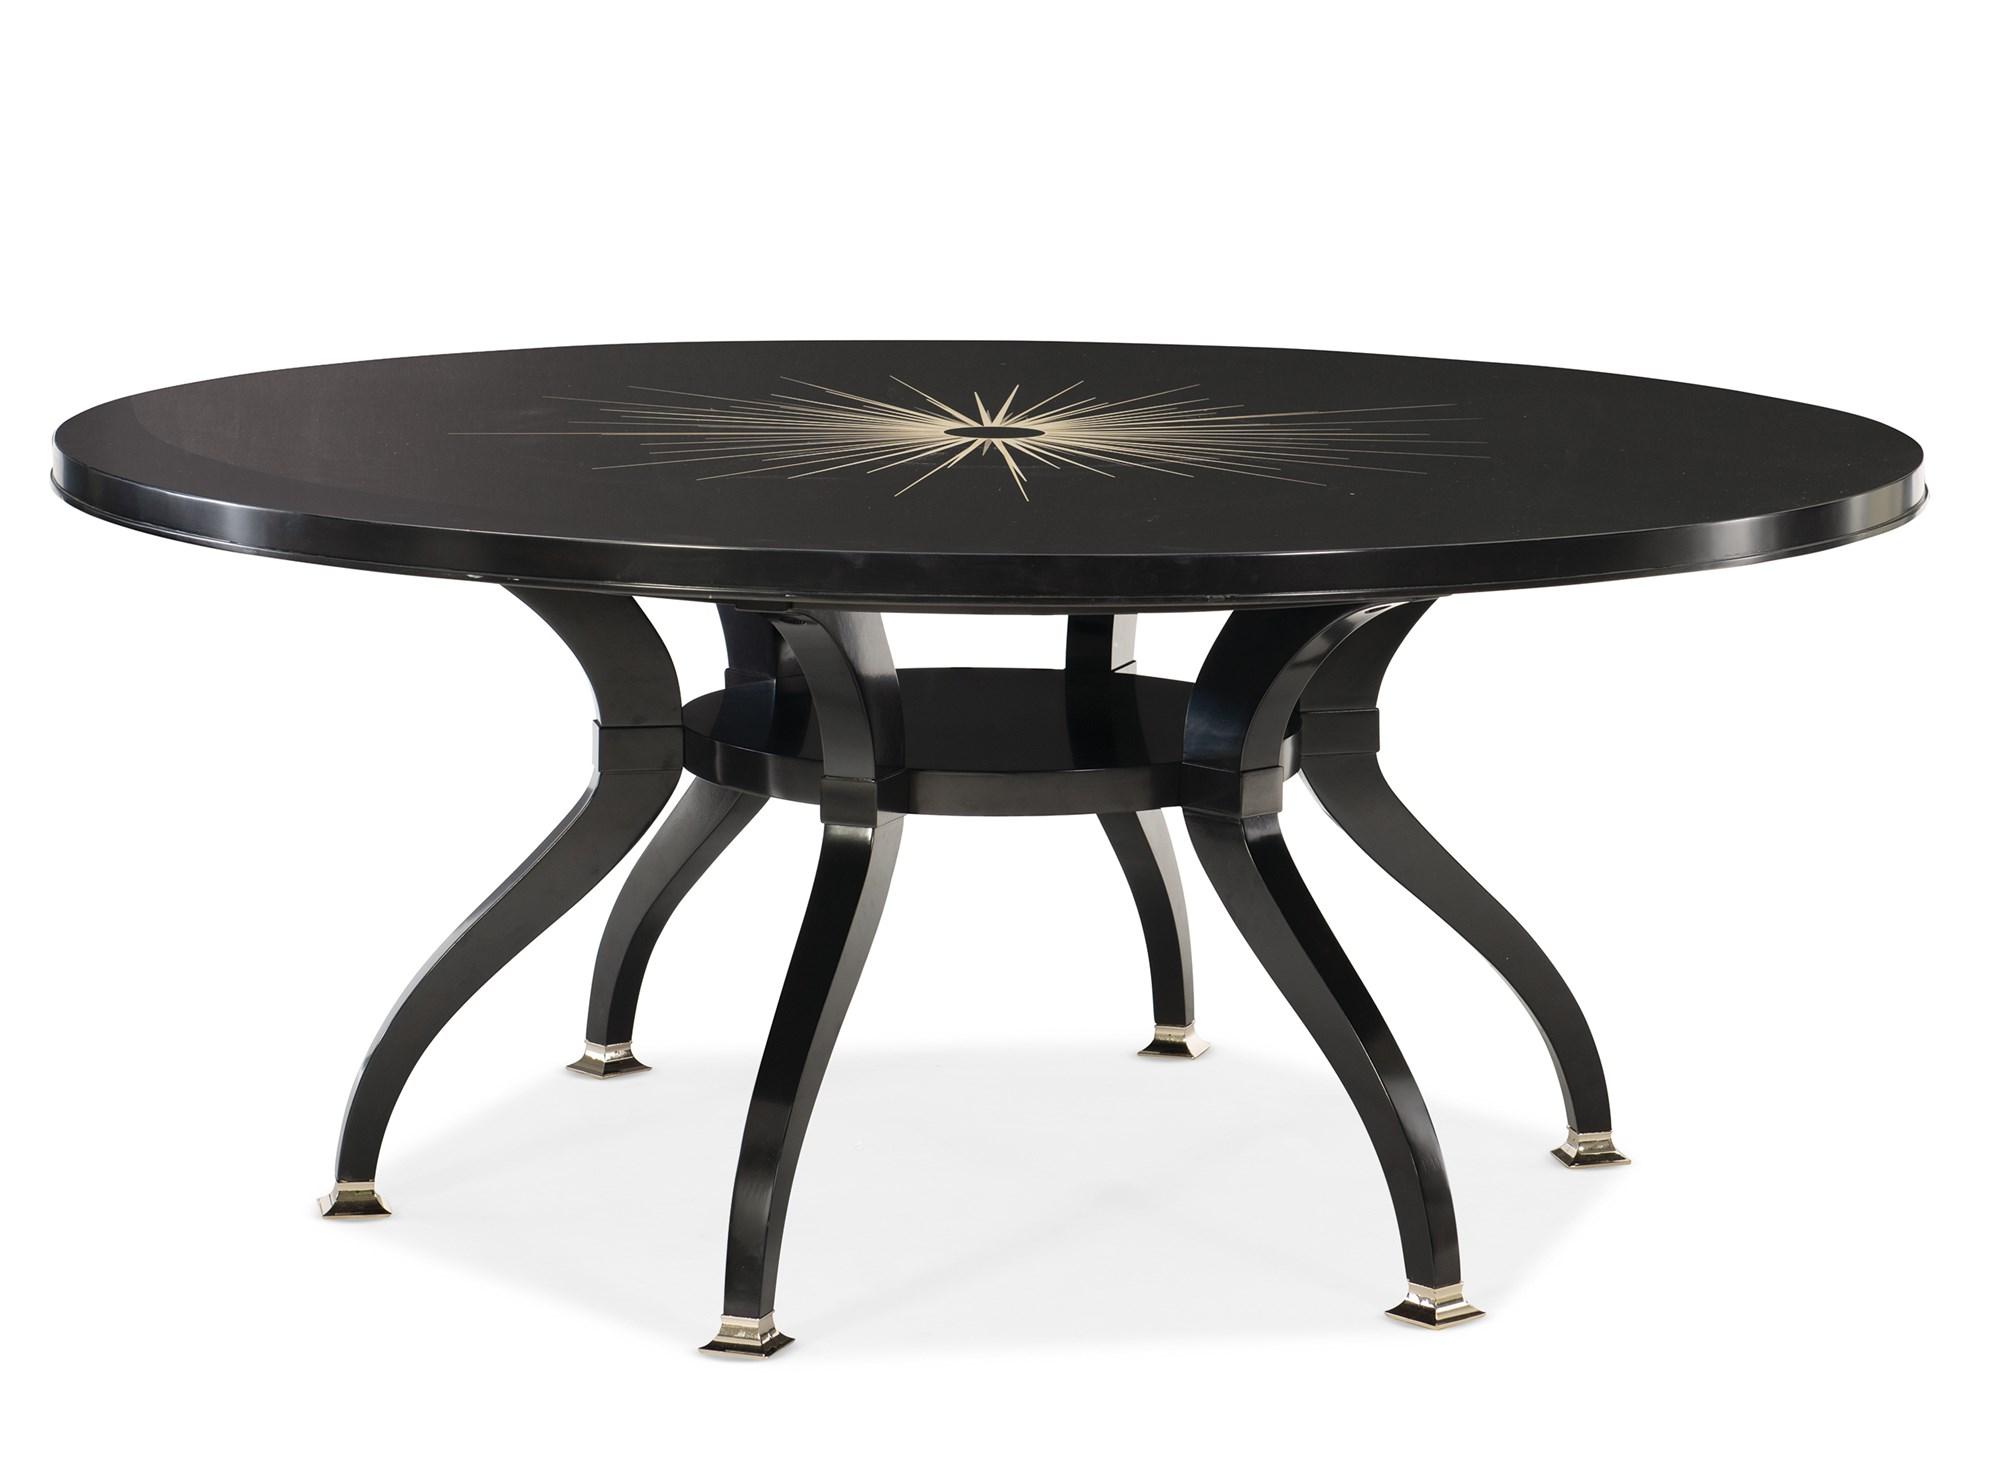 Contemporary Dining Table TOTAL ECLIPSE CLA-419-2012 in Ebony 